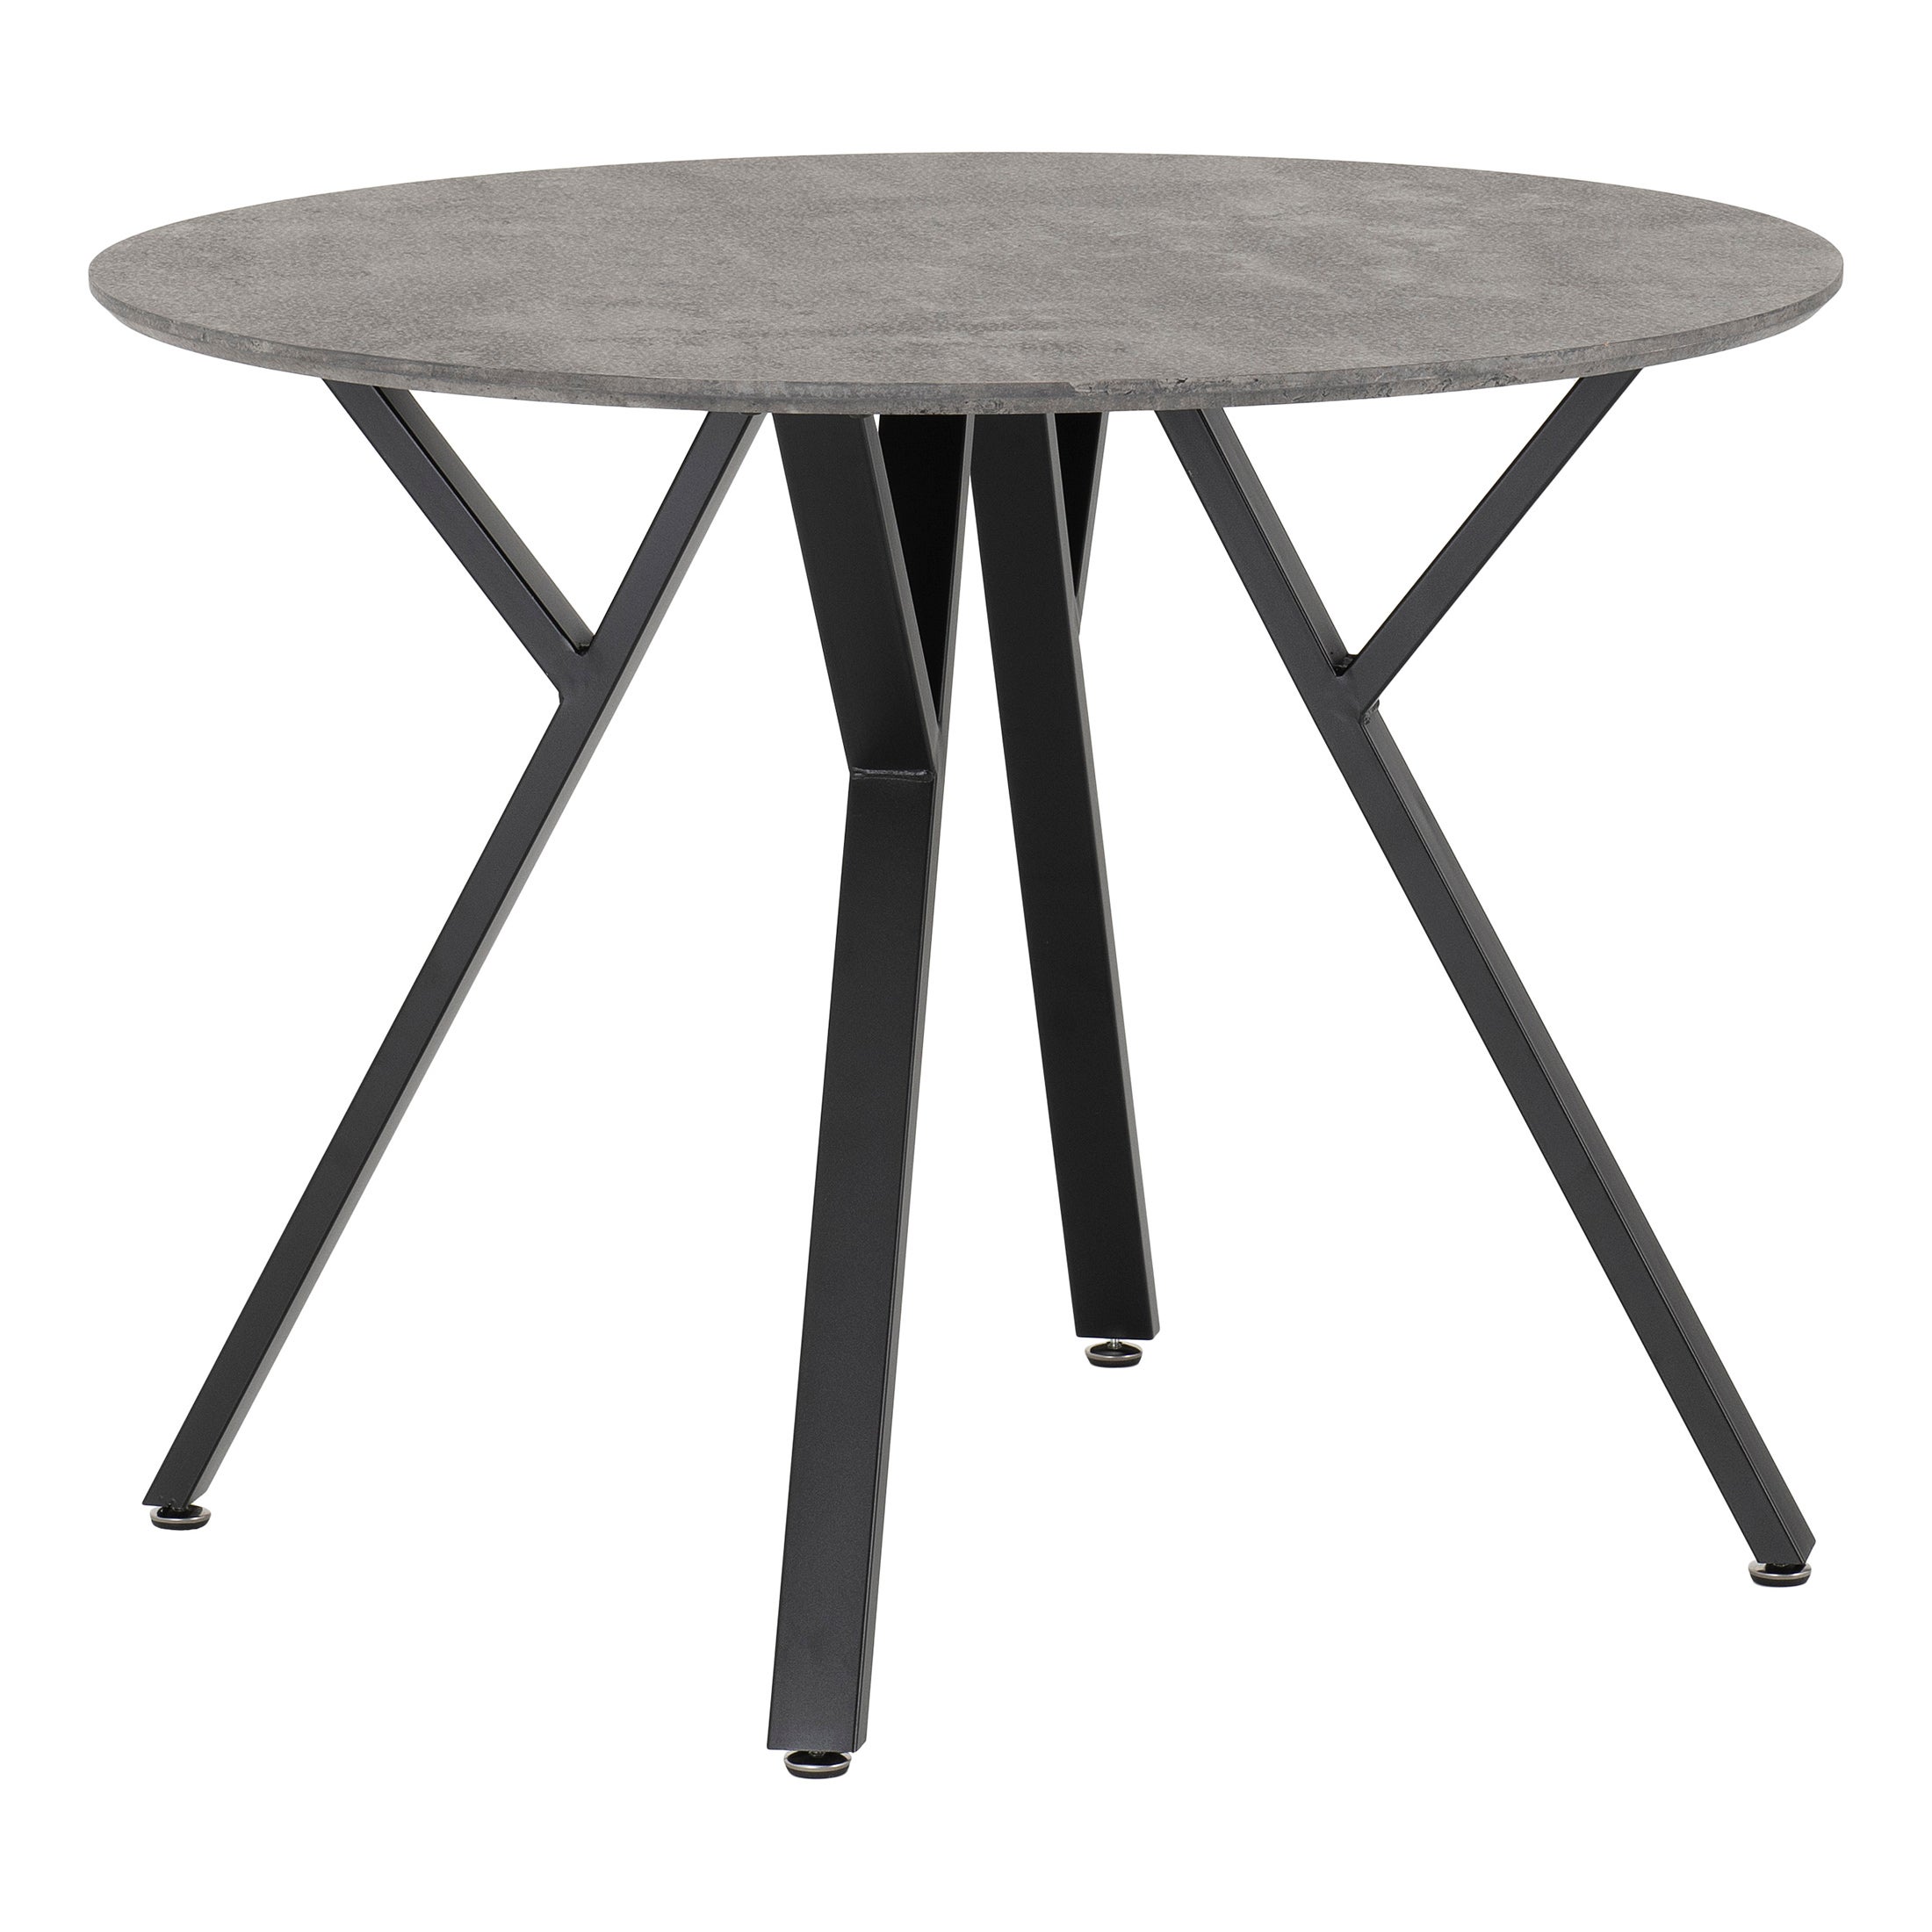 Athens 4 Seater Round Dining Table Grey Concrete Effect Grey